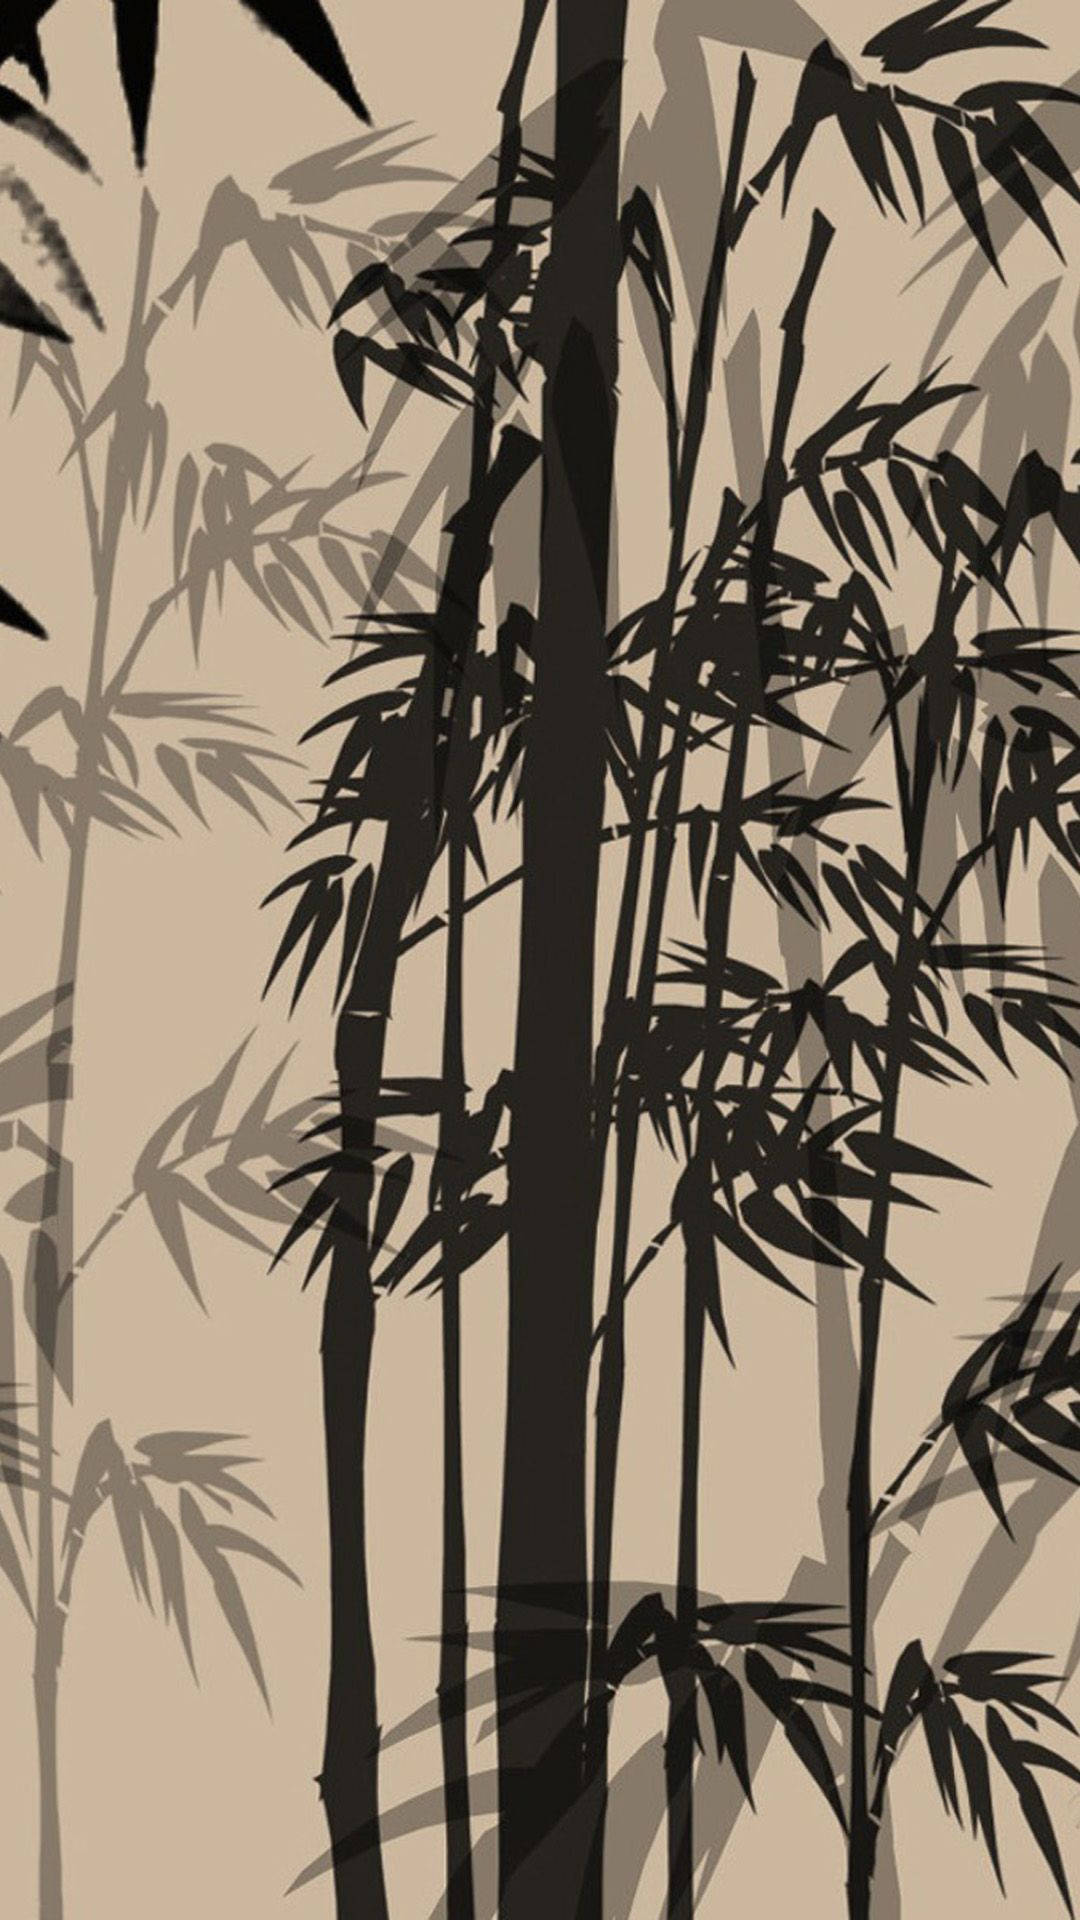 [100+] Bamboo Iphone Wallpapers | Wallpapers.com